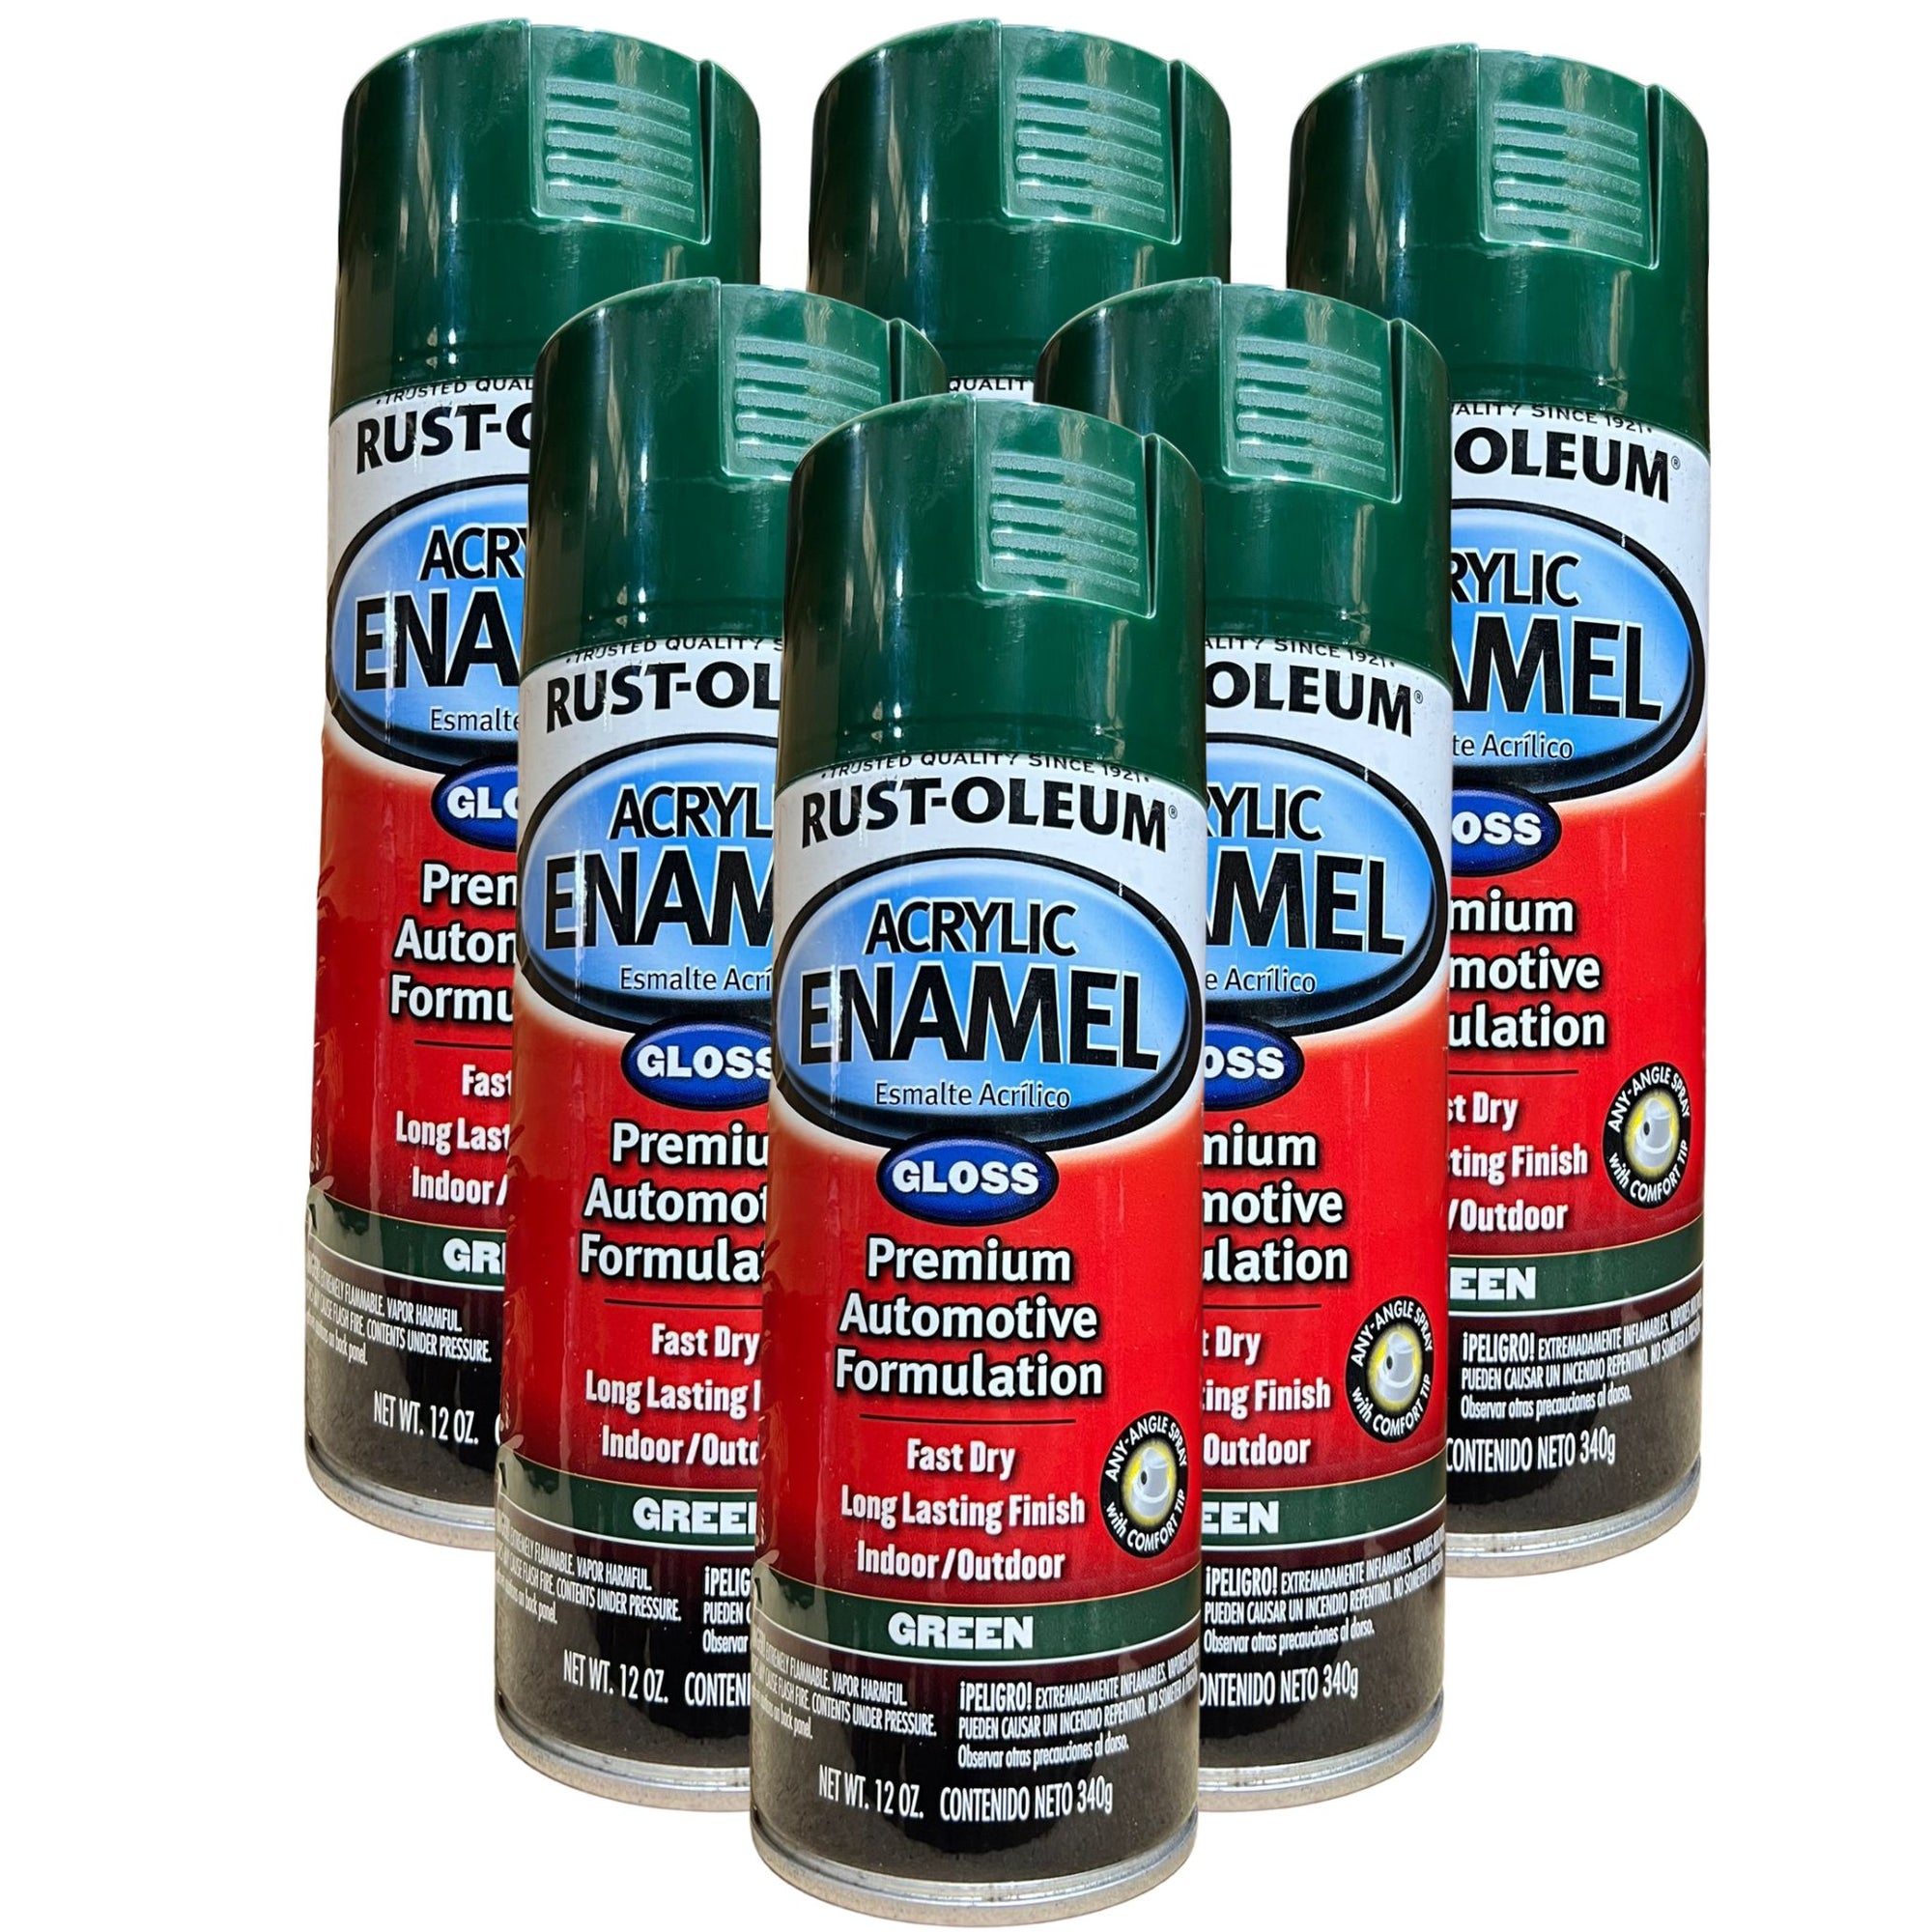 Rust-oleum Acrylic Enamel - Gloss Green 6 Cans - South East Clearance Centre